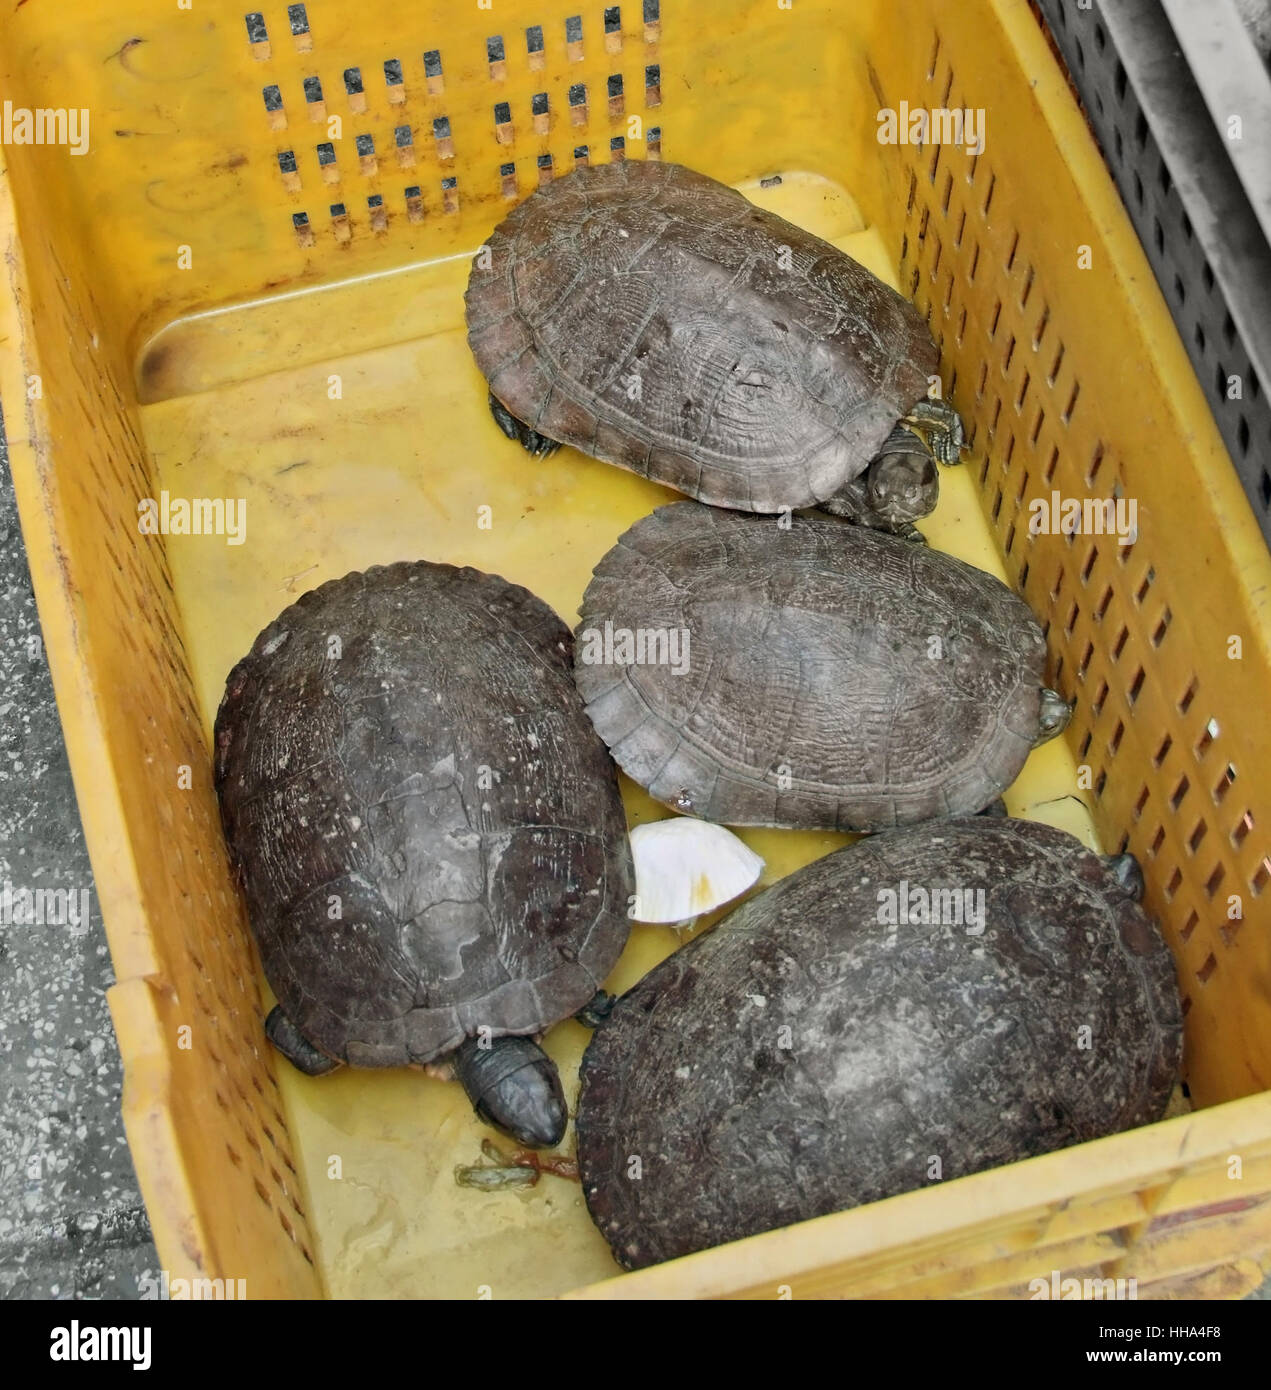 high angle view of some tortoises in a yellow box Stock Photo